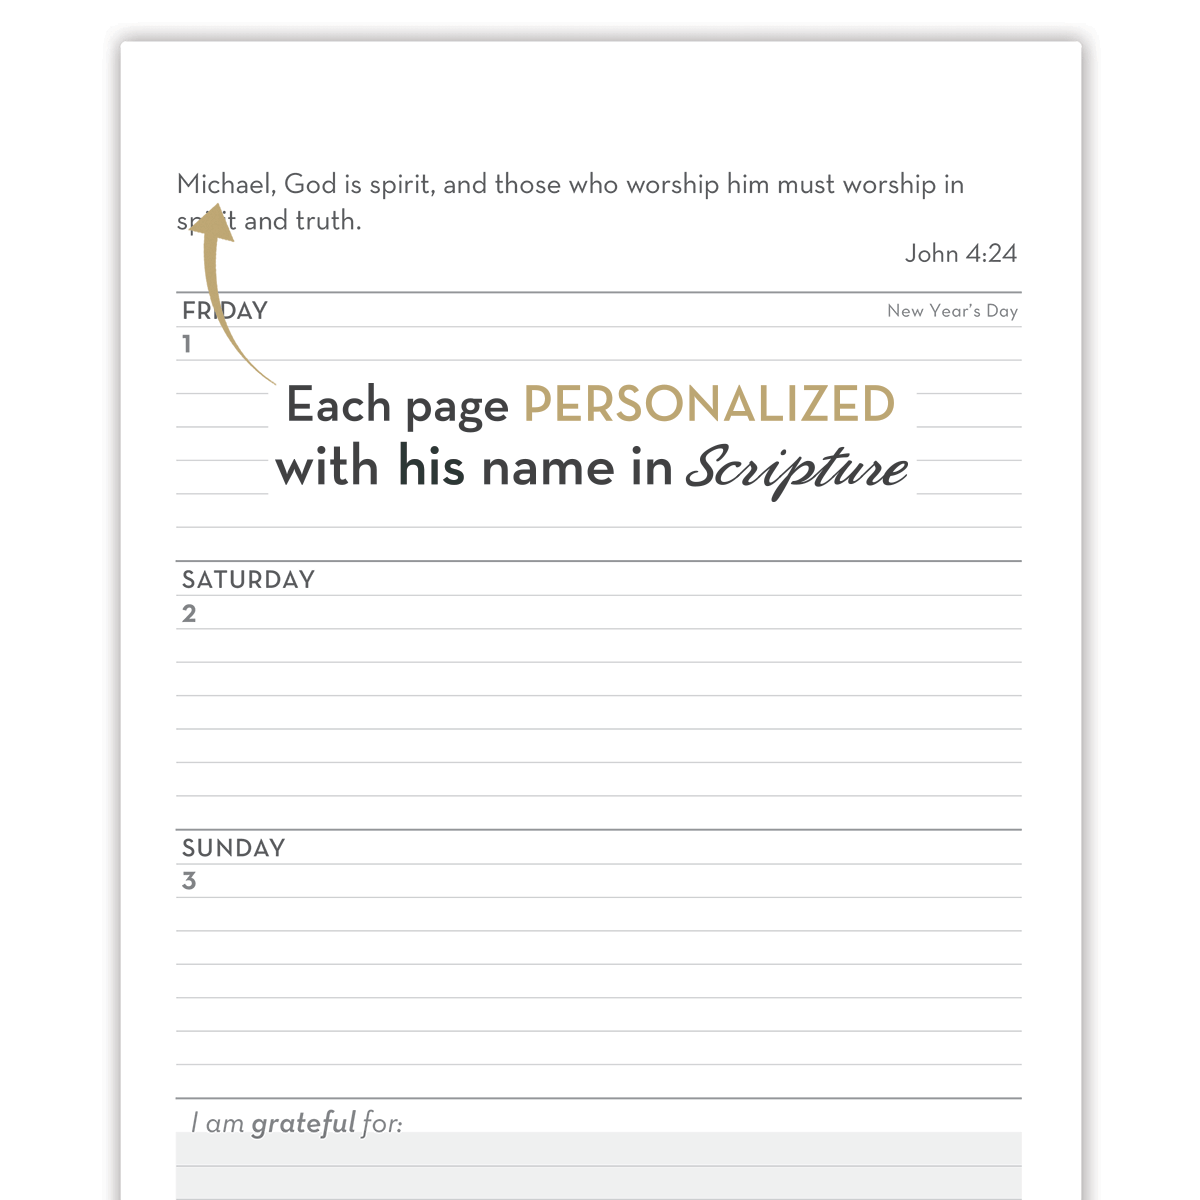 Personalized Christian Planner for Men, Christian Gifts, Daily Devotional, Prayer Planner, Bible Planner, Bible Verse Planner, Scripture Planner, Personalized Scripture planner, Personalized prayer planner, Christian wedding gifts, Christian journal, Bible Verse Journal, Prayer Journal, Personalized Scripture